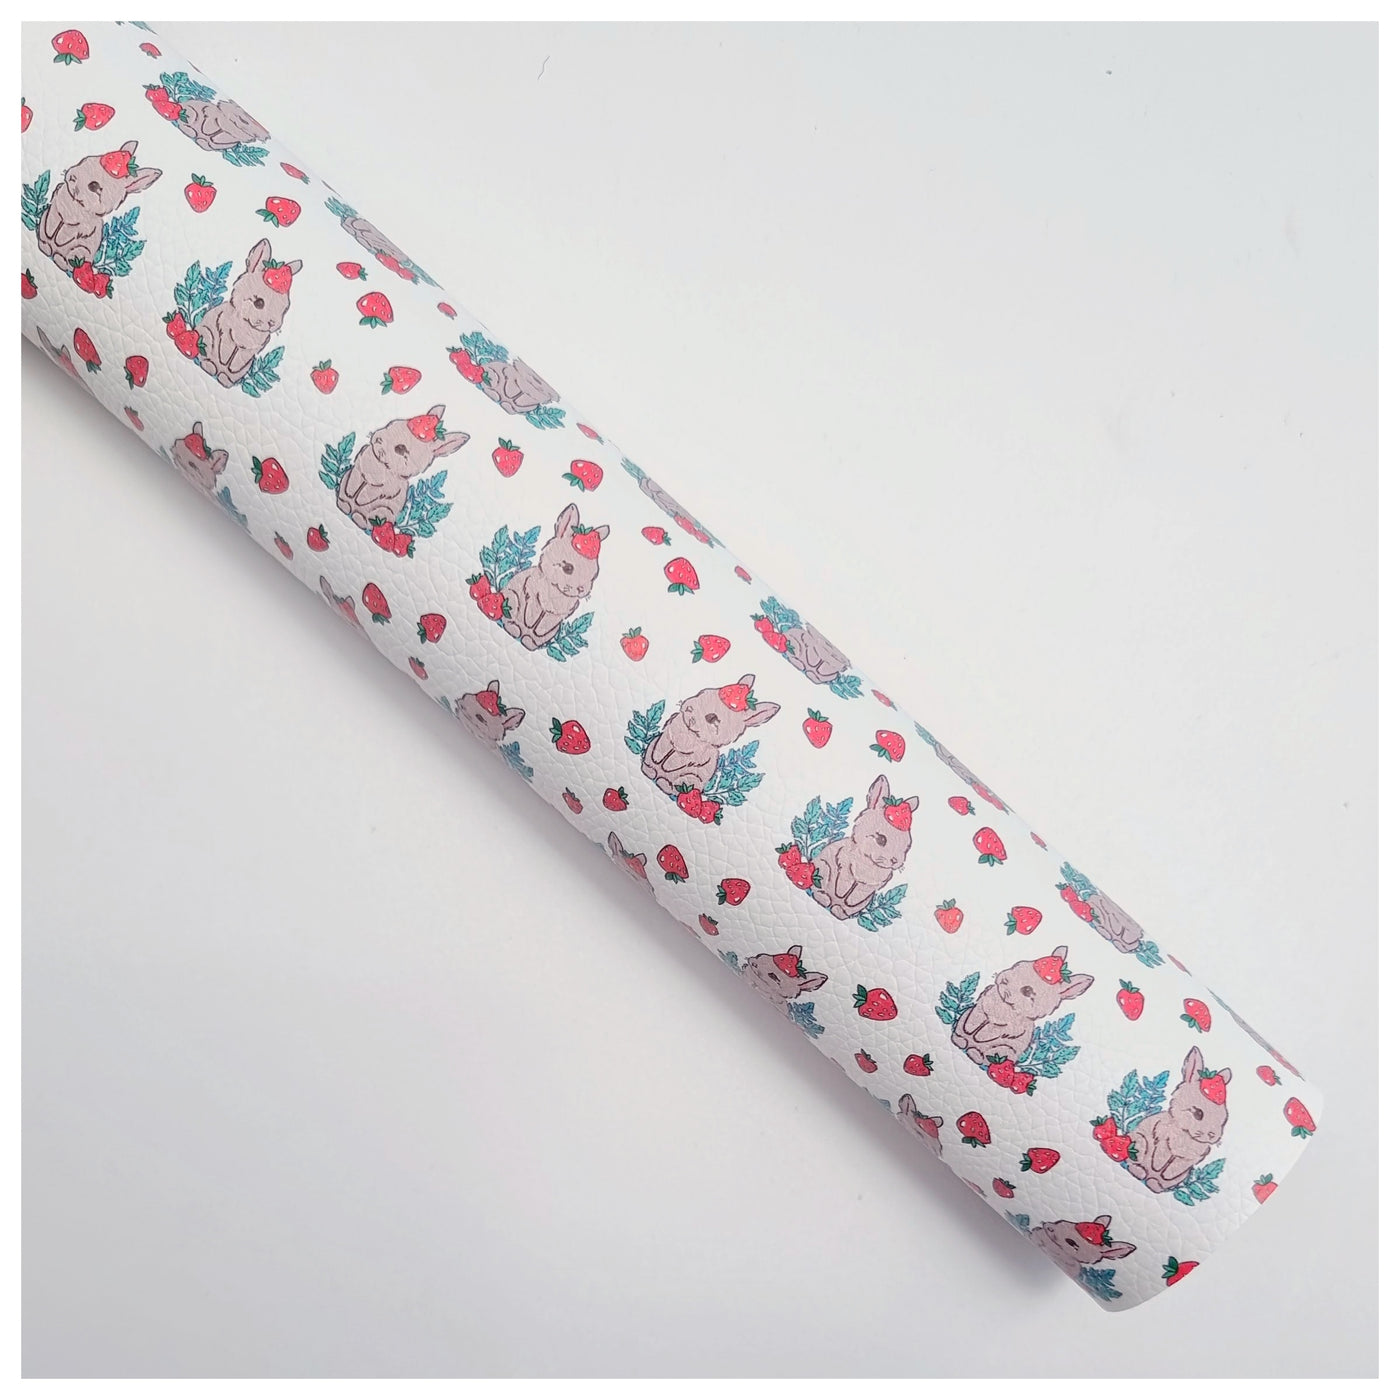 A4 Sheet of Strawberry Bunnies Litchi Leather